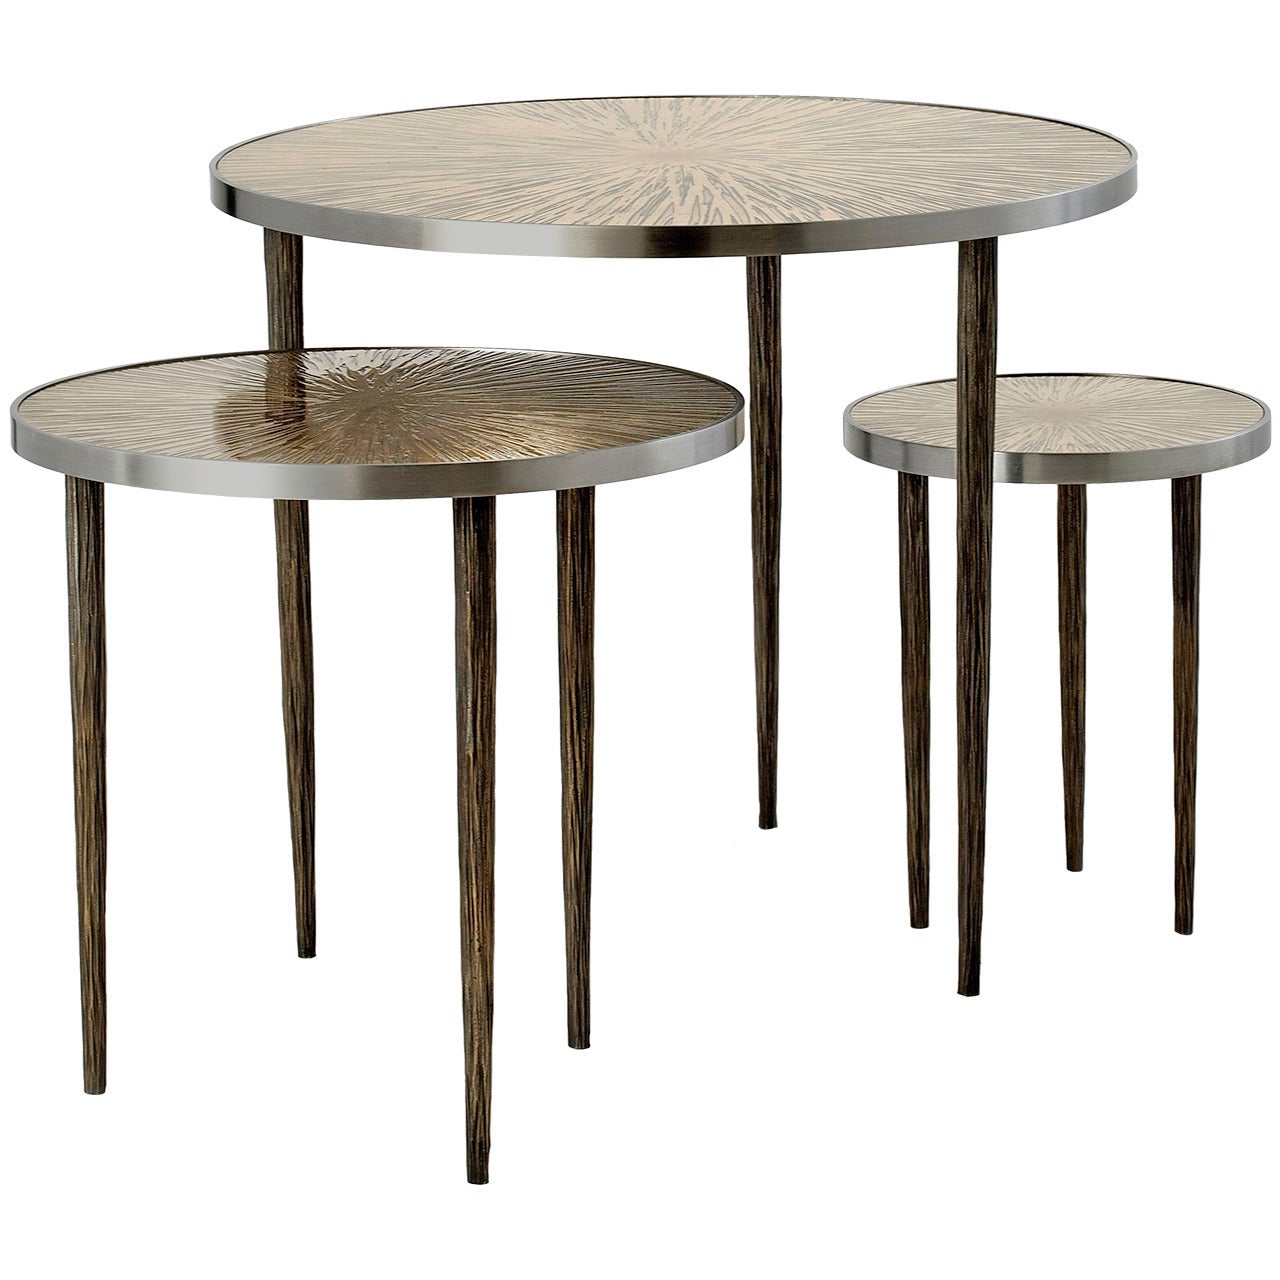 "Astres" Set of Three Nesting Tables by Franck Chartrain